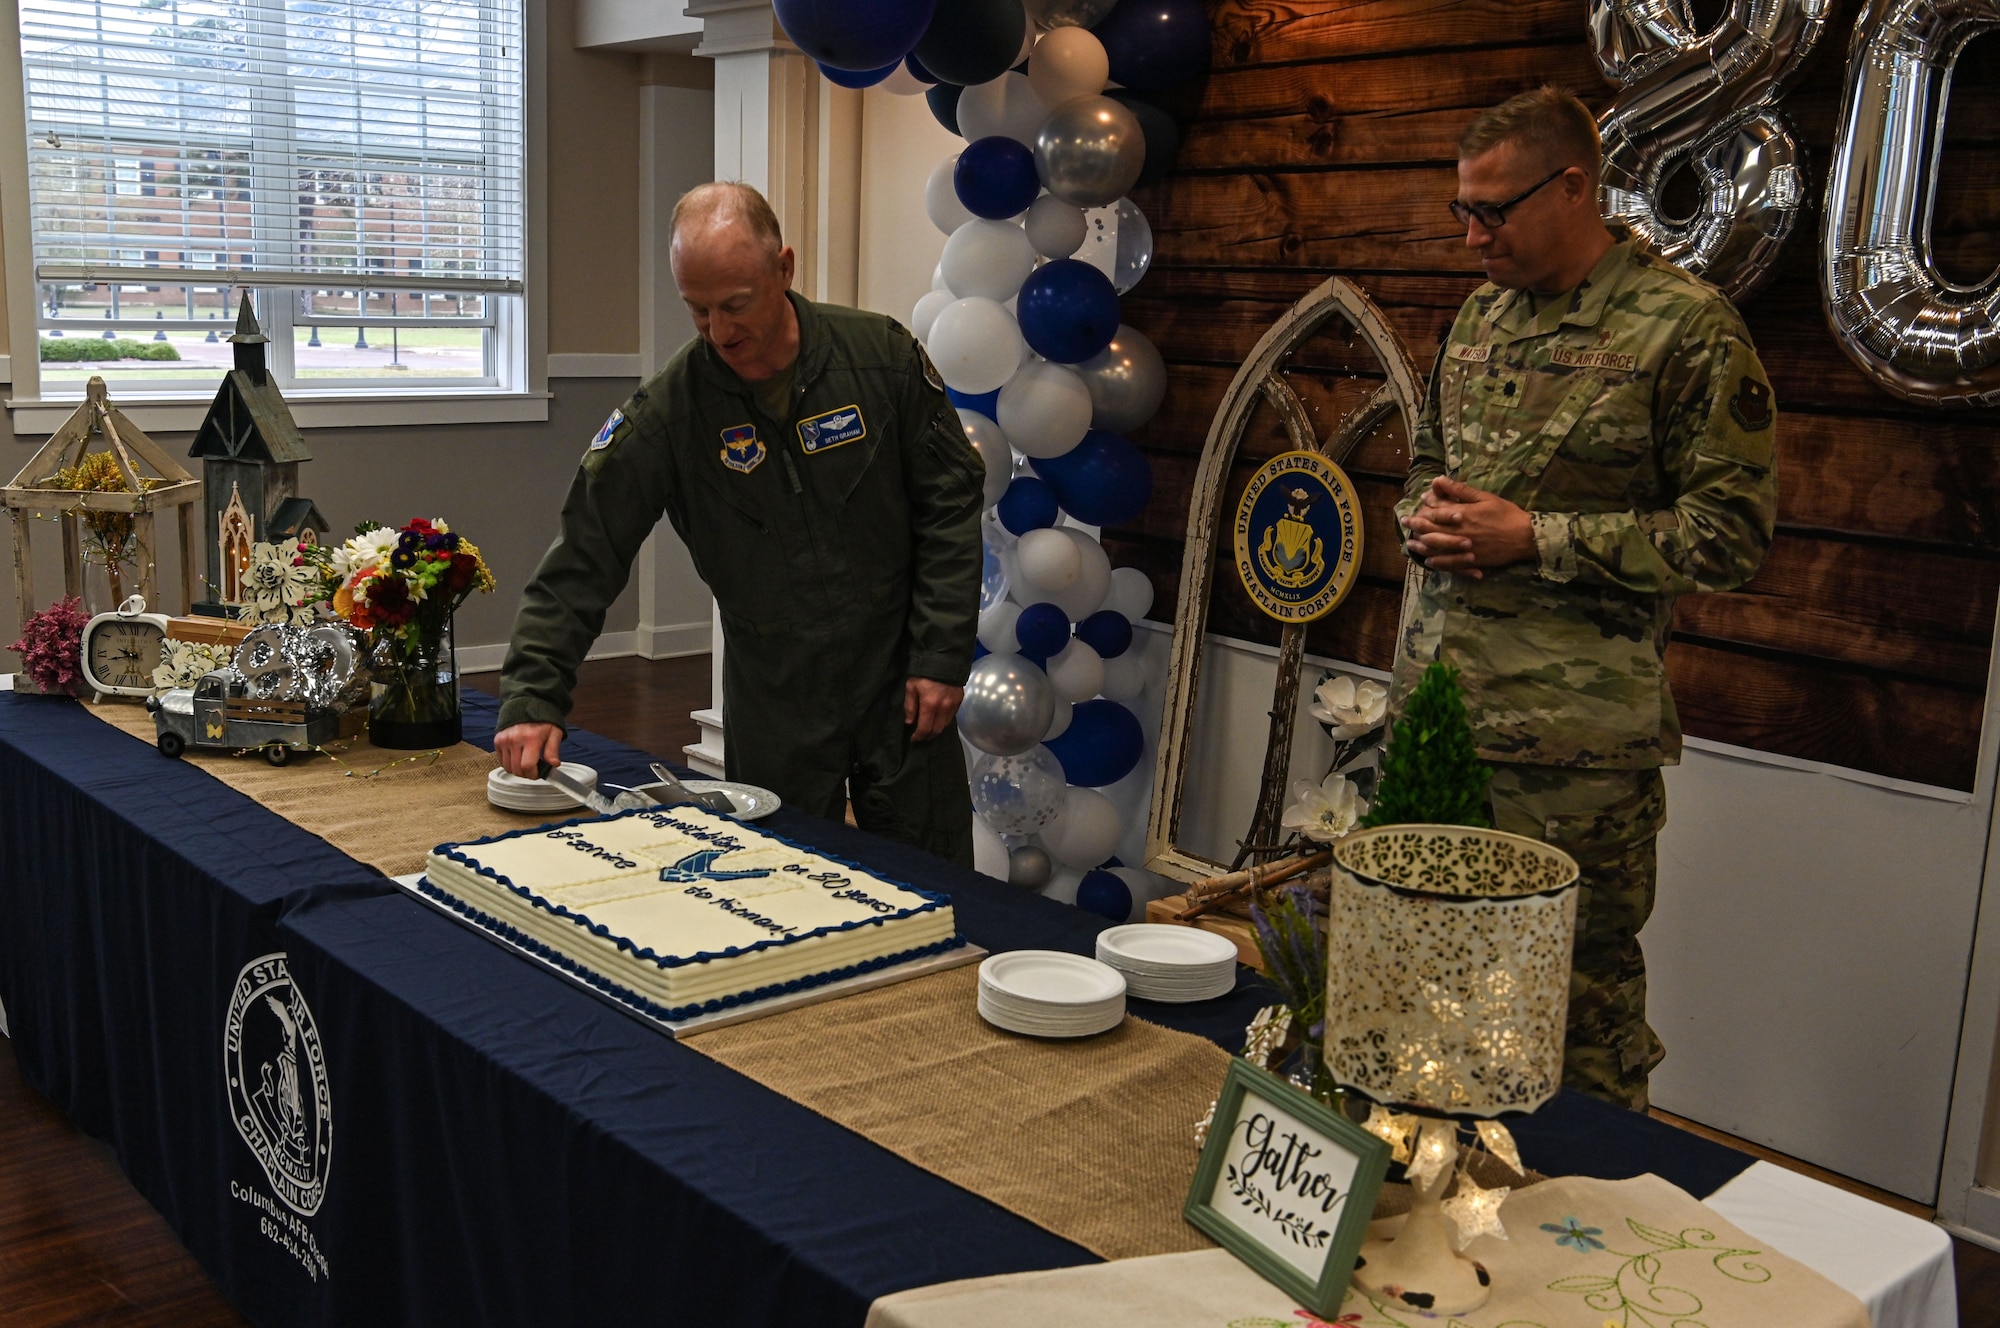 Col. Seth Graham, 14th Flying Training Wing commander cuts a cake to commemorate the 80th anniversary of the Columbus Air Force Base Chapel on April 5, 2022, at Columbus AFB, Miss. The mission of the Columbus AFB Chapel is to “Develop Spiritually Strong Airmen and Families”. (U.S. Air Force photo by Senior Airman Davis Donaldson)